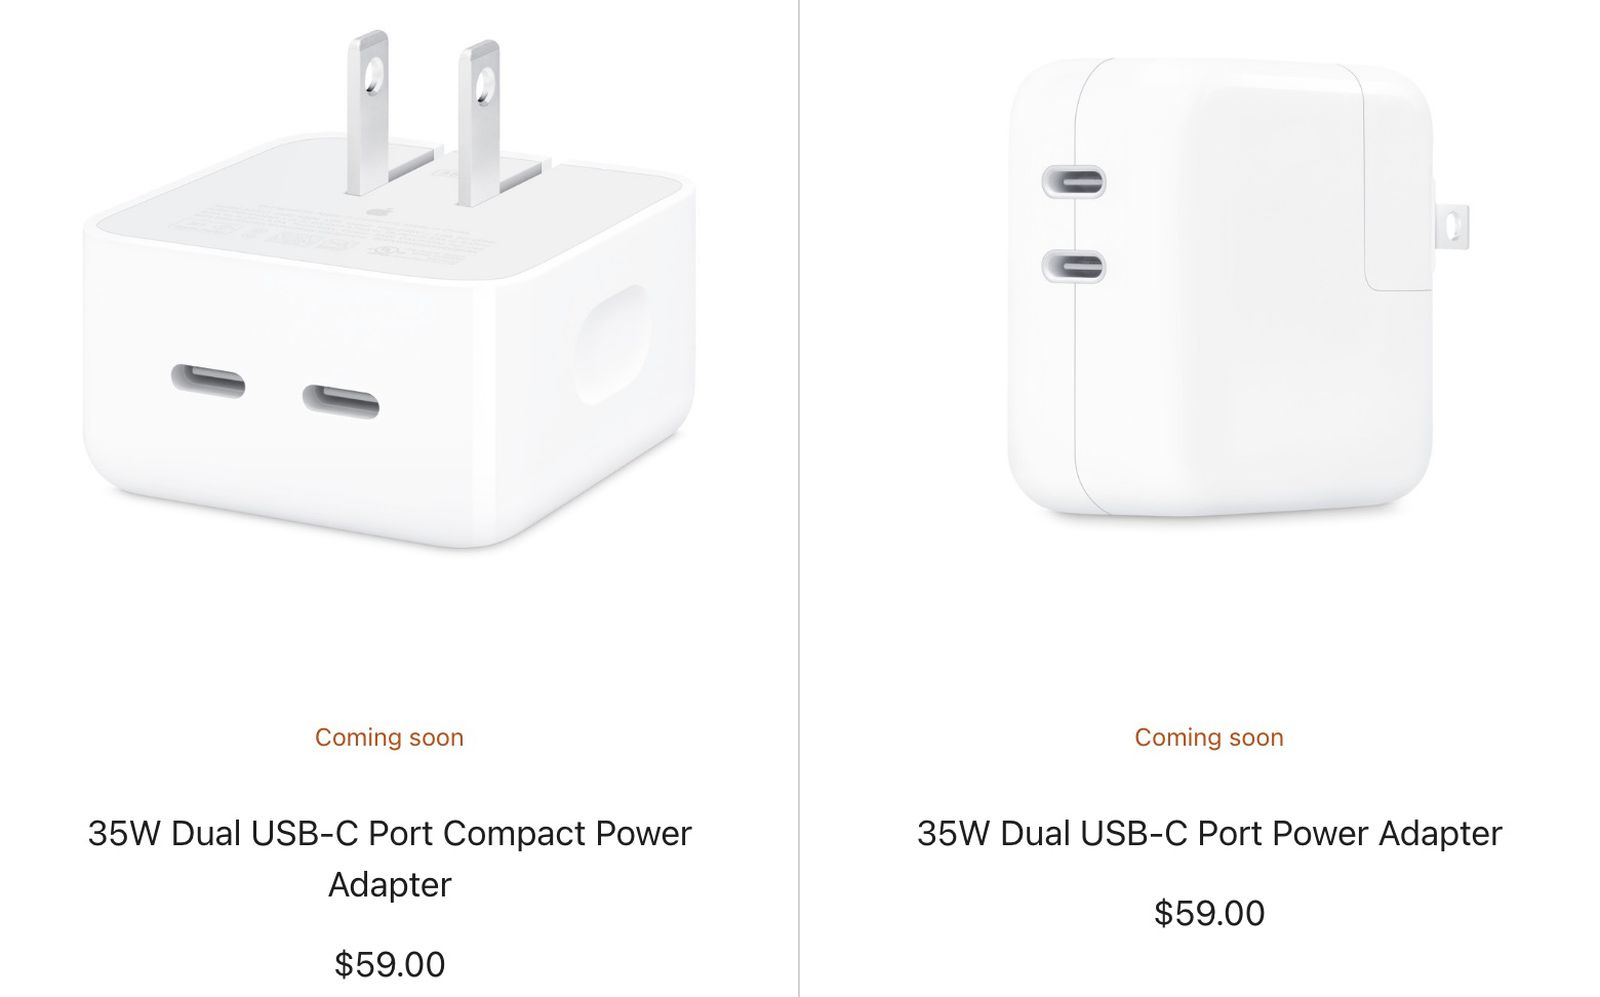 Apple Releasing 35W Power Adapter With Dual USB-C Ports in Standard and Compact Sizes - macrumors.com